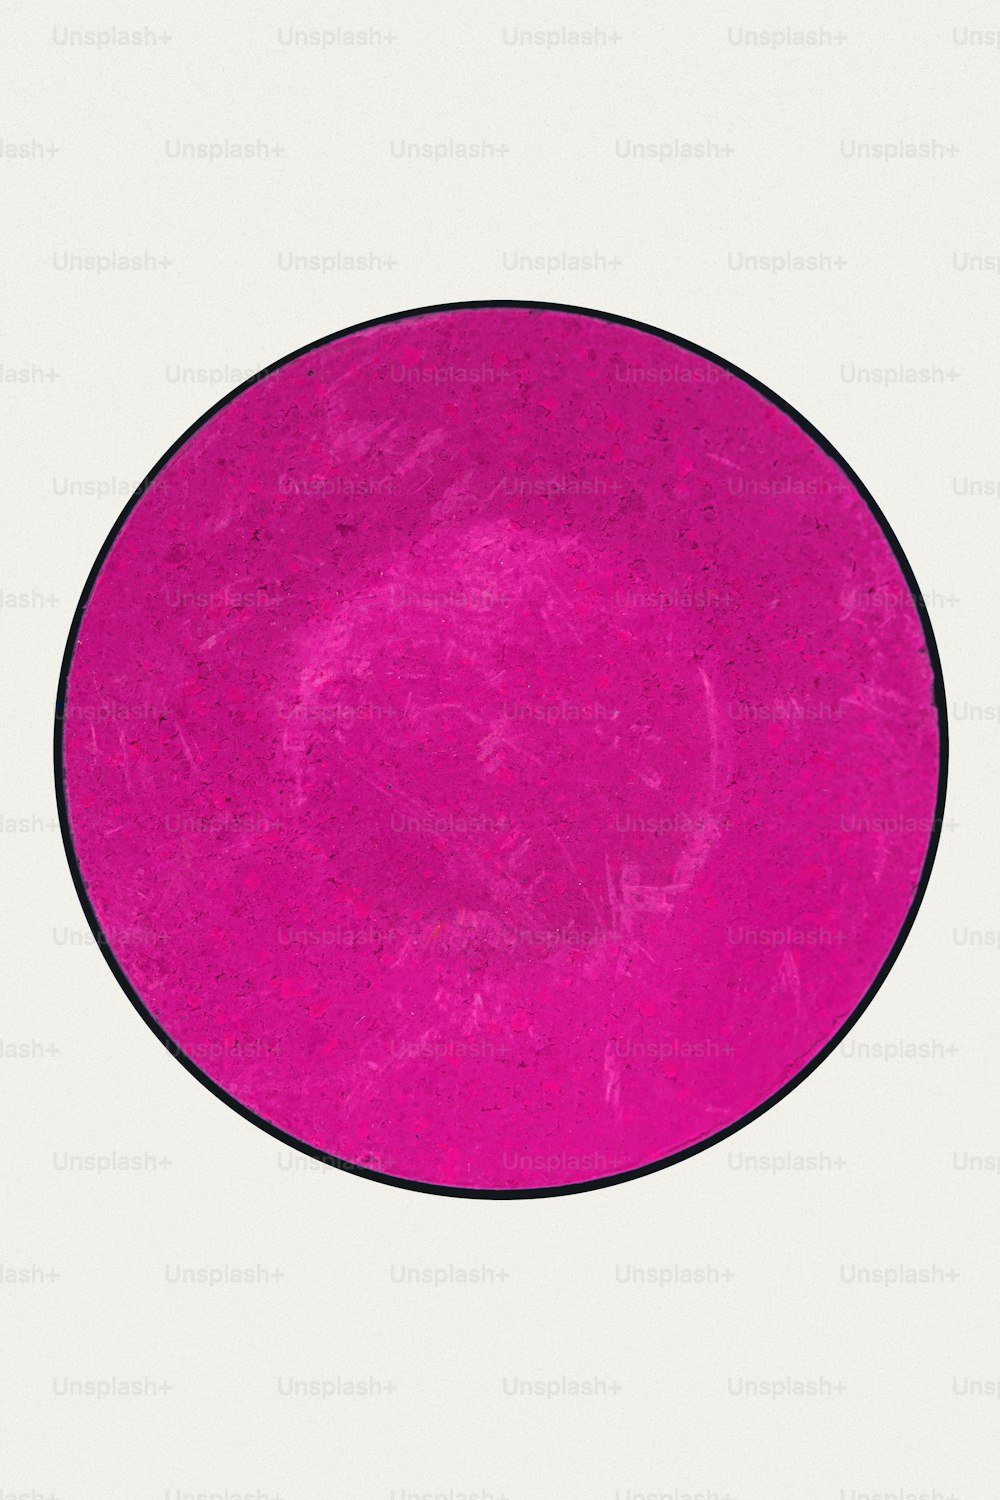 a pink circle with a black border on a white background